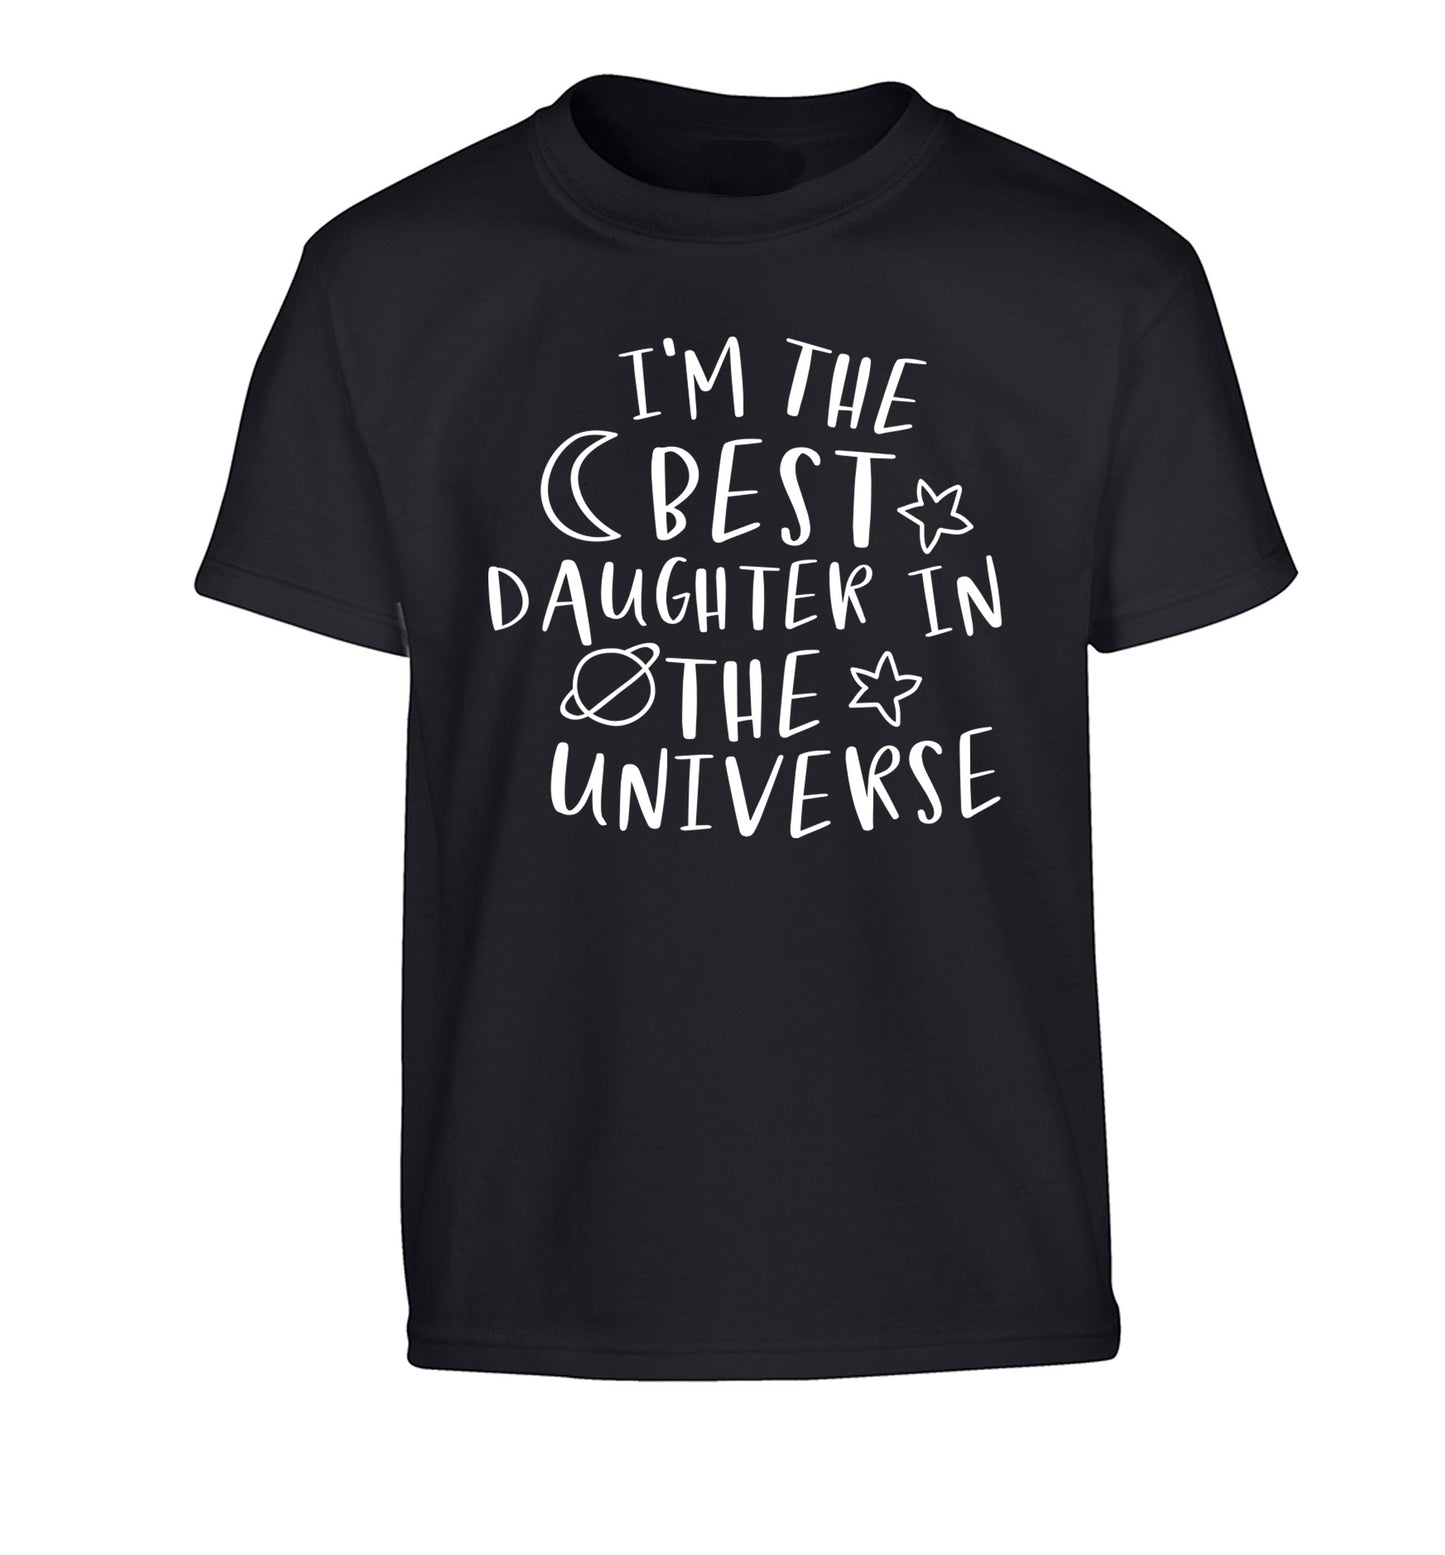 I'm the best daughter in the universe Children's black Tshirt 12-13 Years